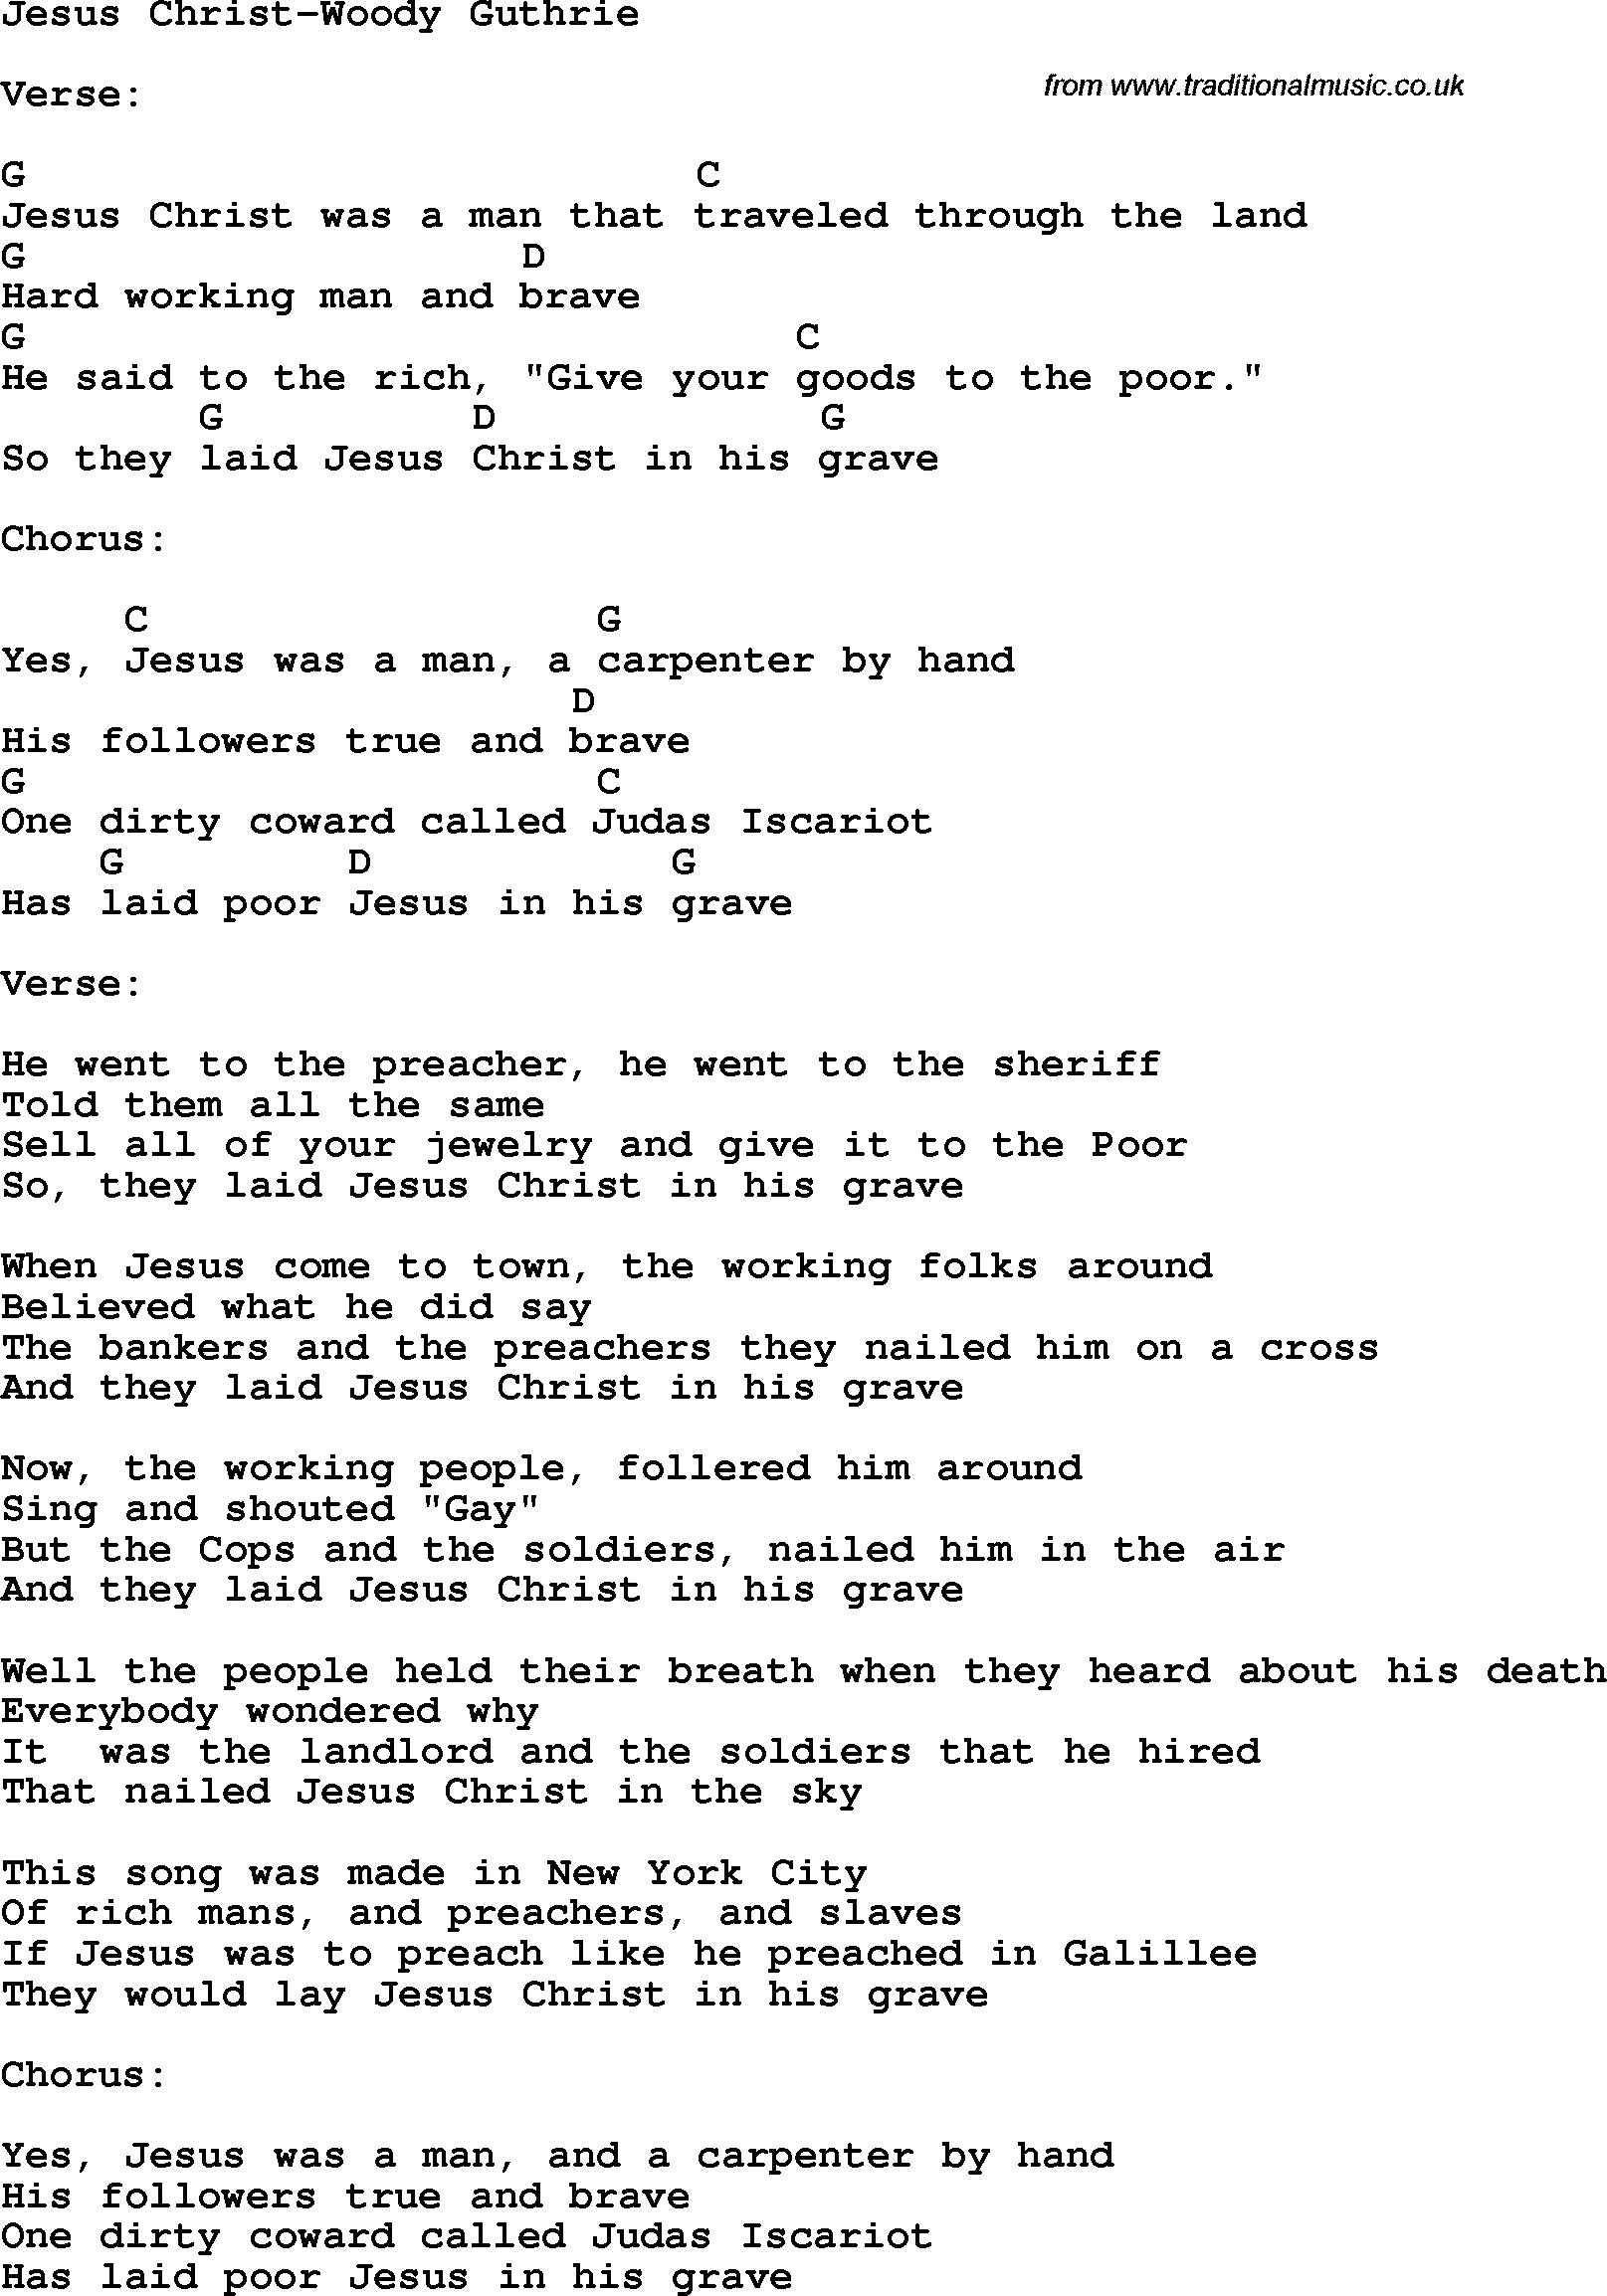 Protest Song Jesus Christ-Woody Guthrie lyrics and chords